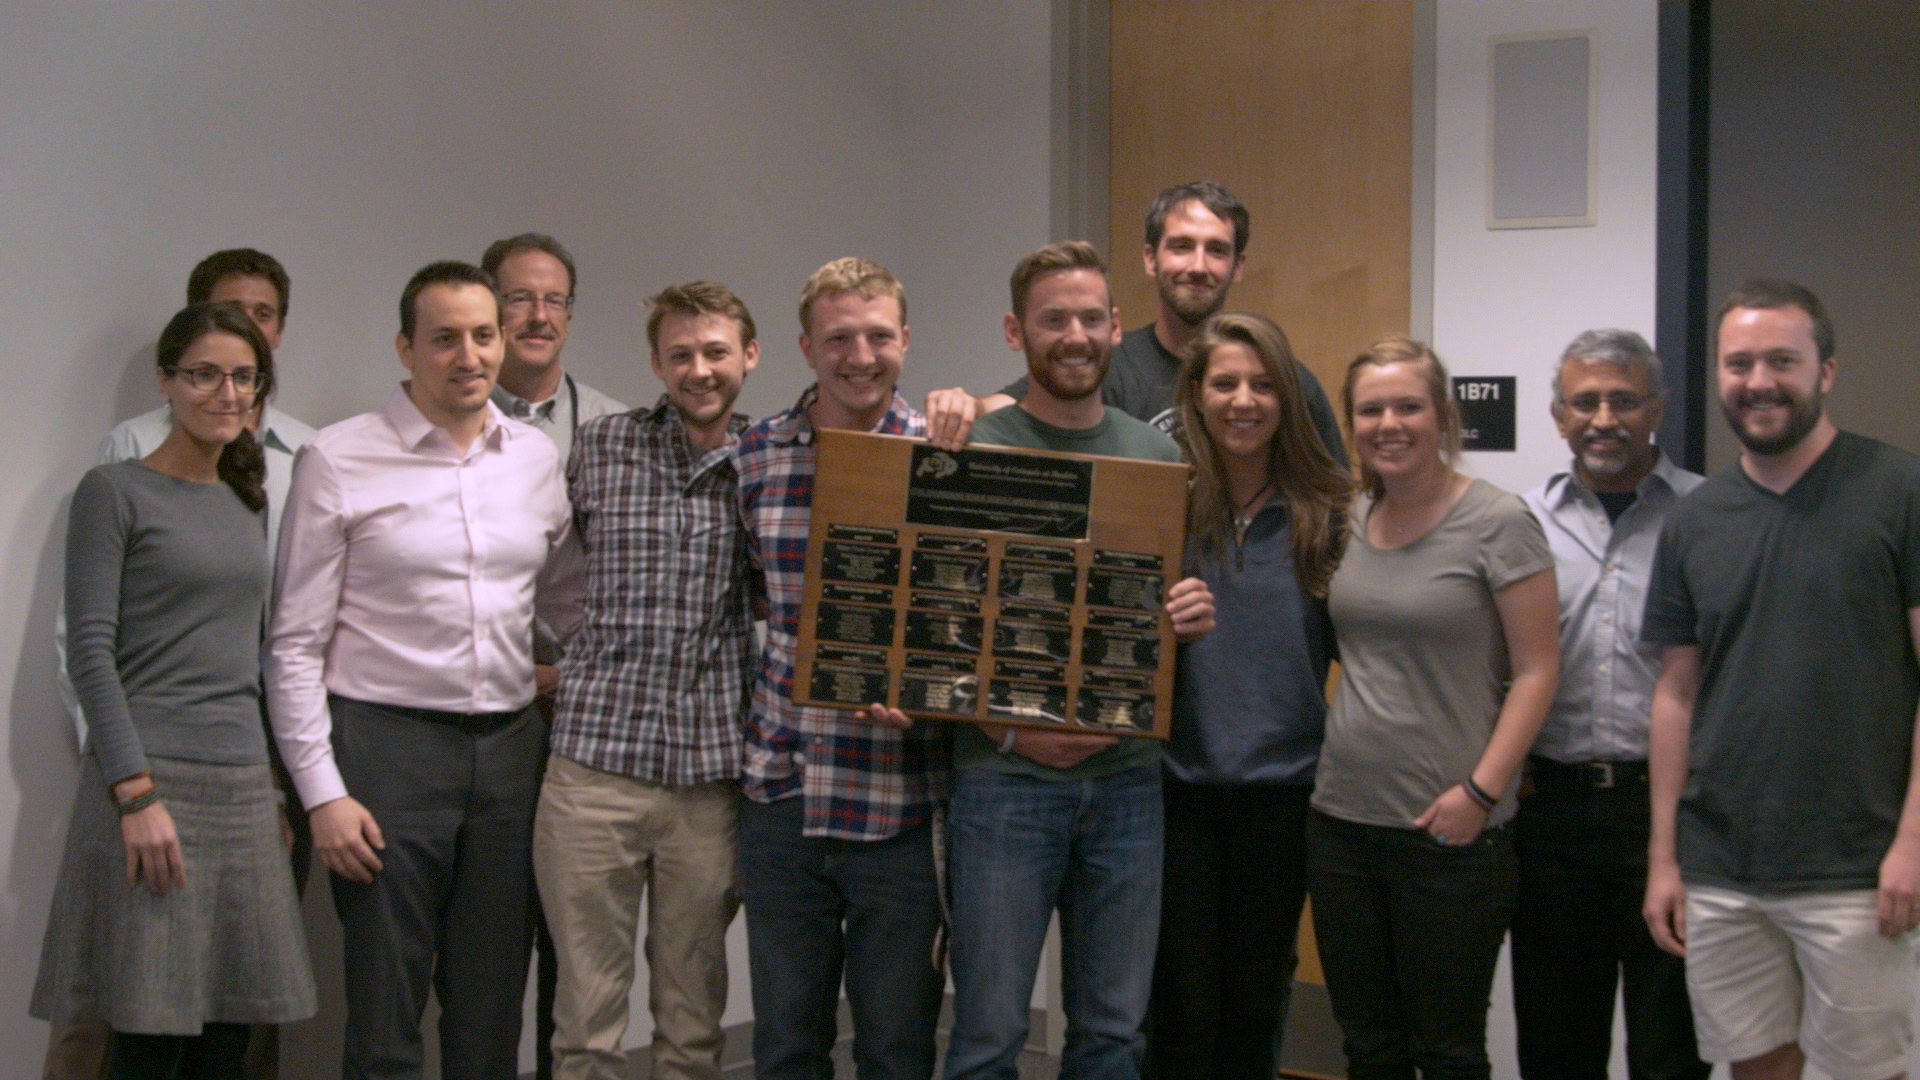 The judges presented students from DG Engineering with the award for best design.